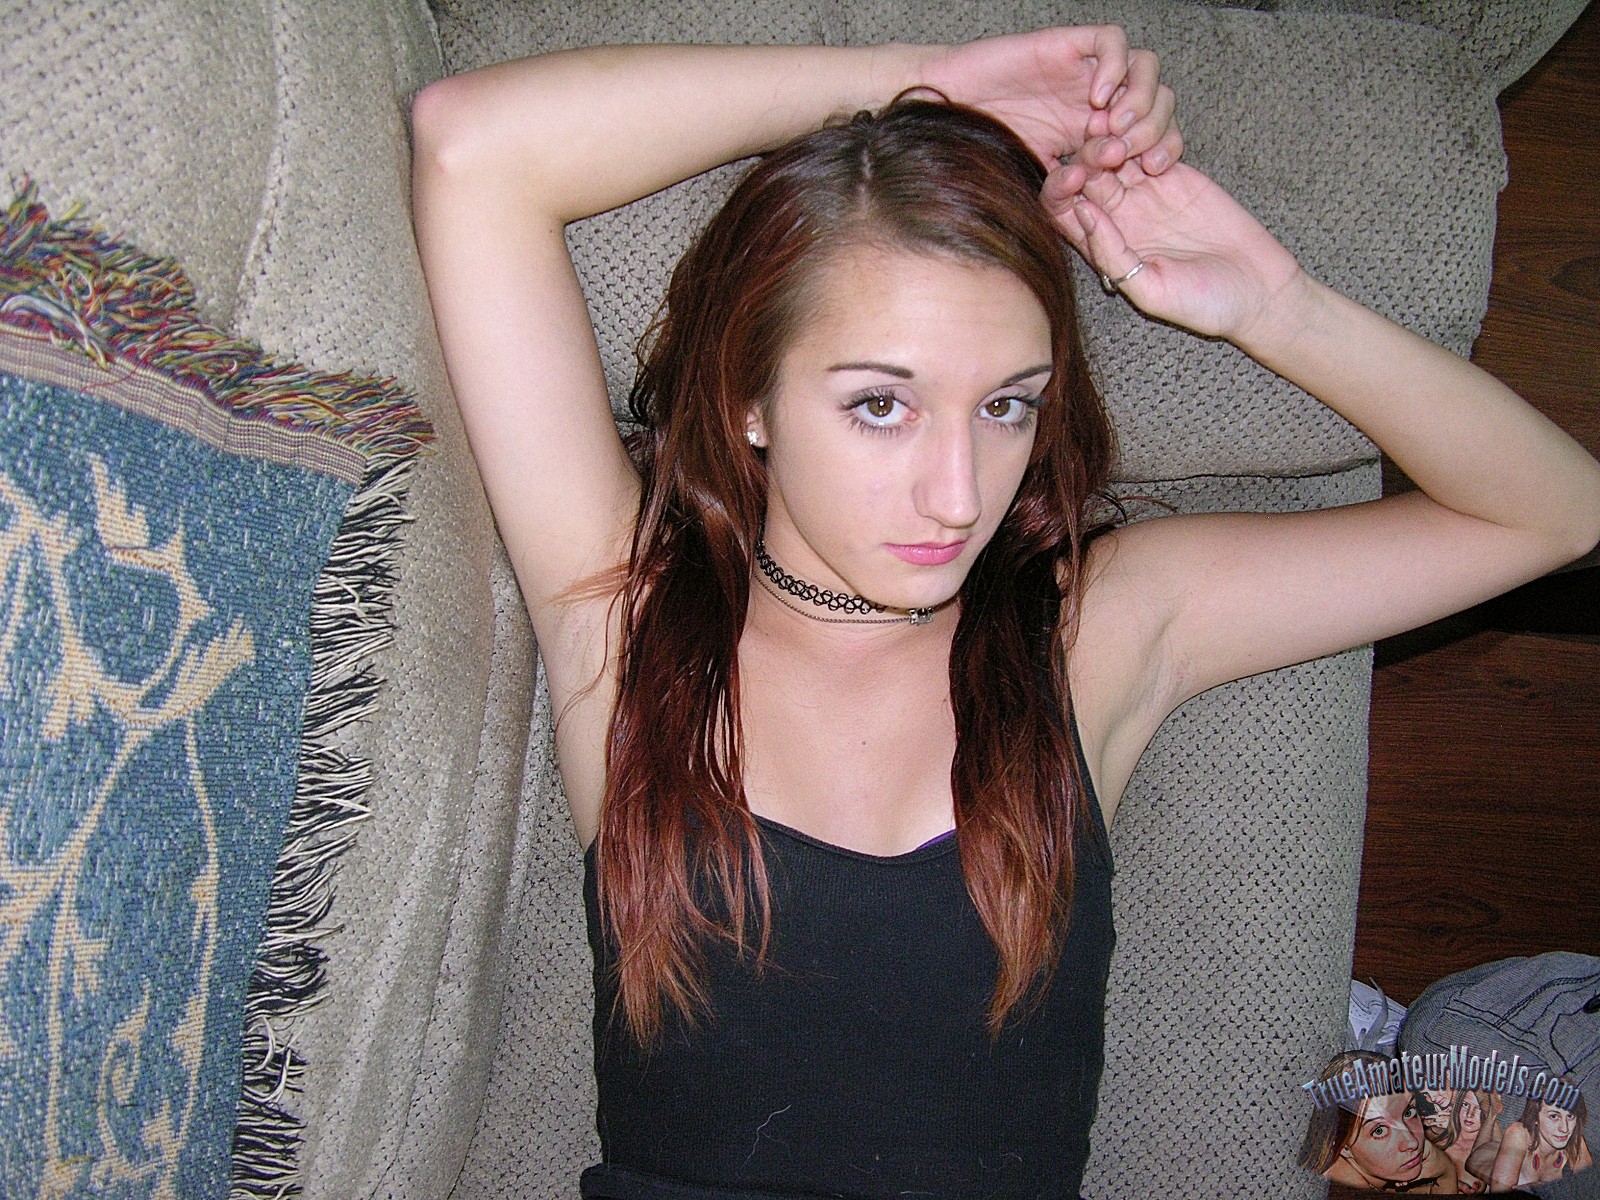 Amy Cute Brunette Amateur Teen From Shopping Mall pic